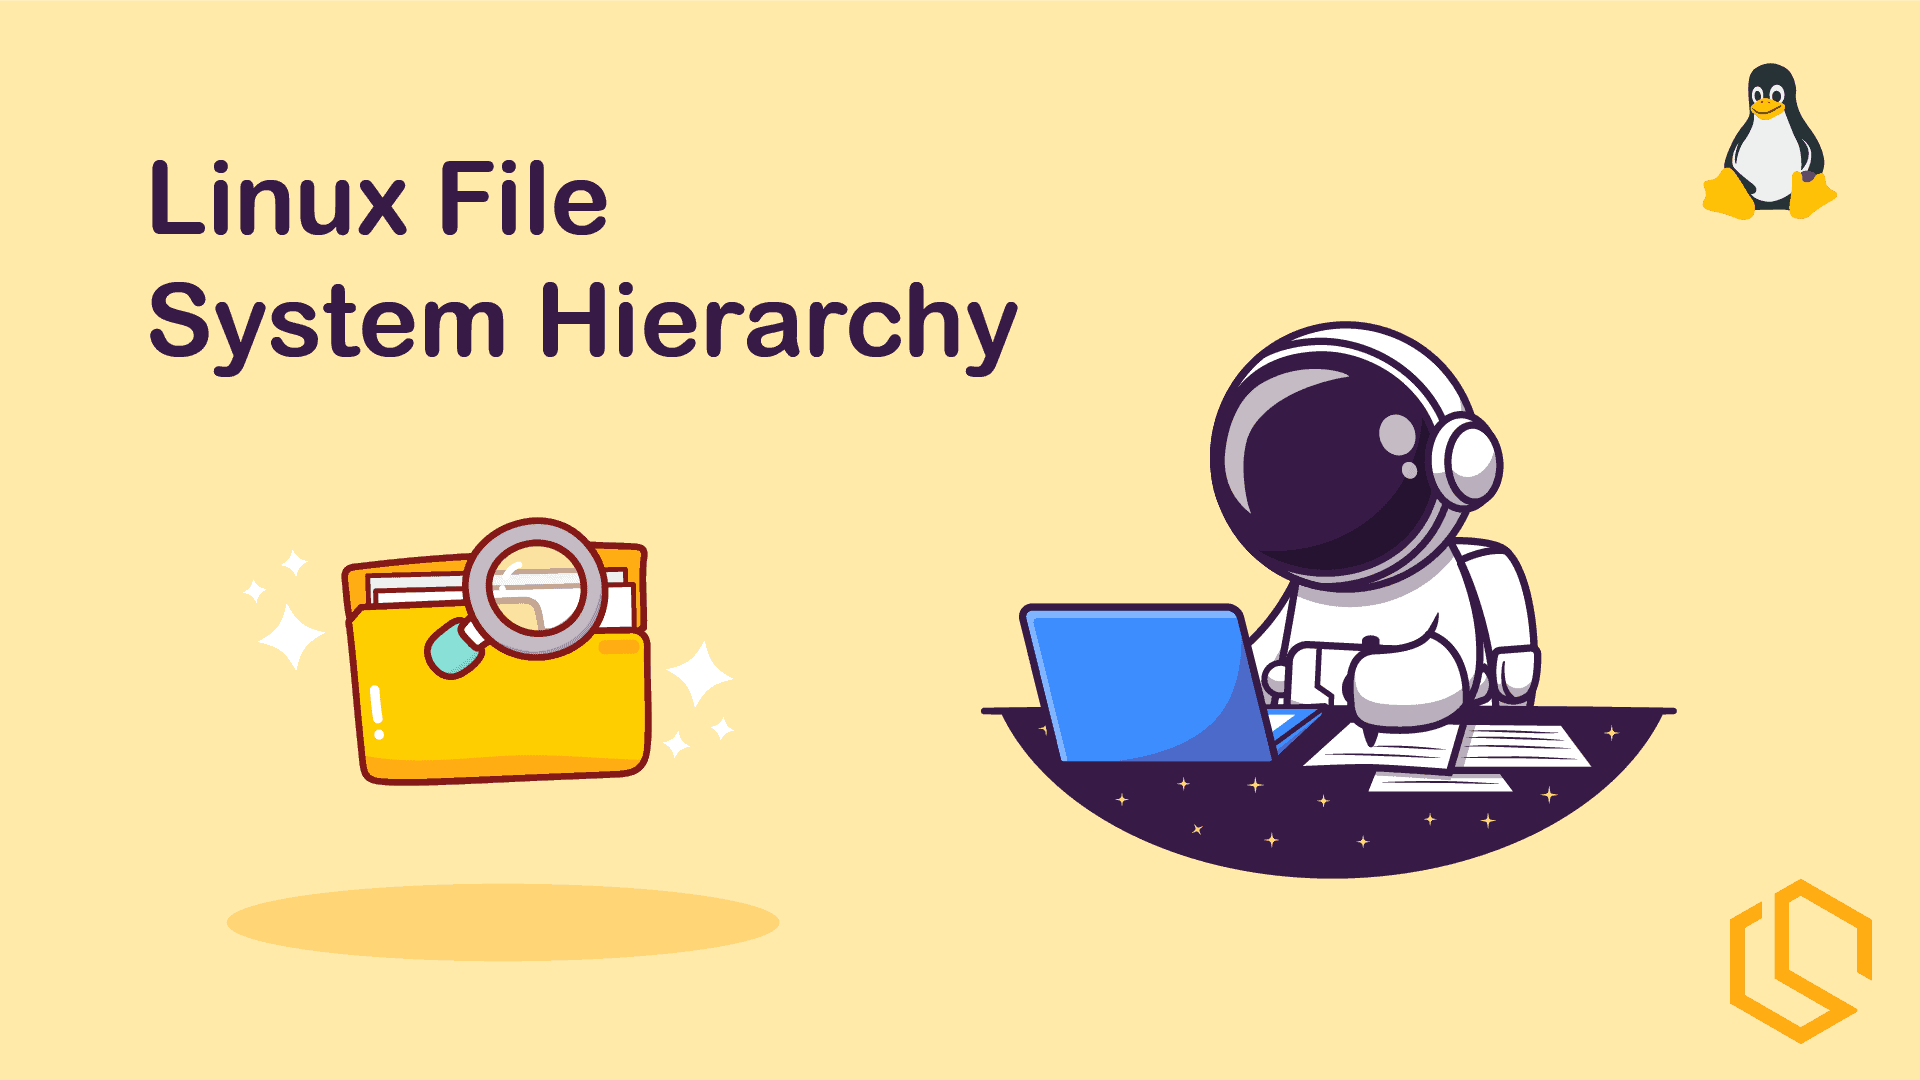 linux file system, linux file system hierarchy, linux